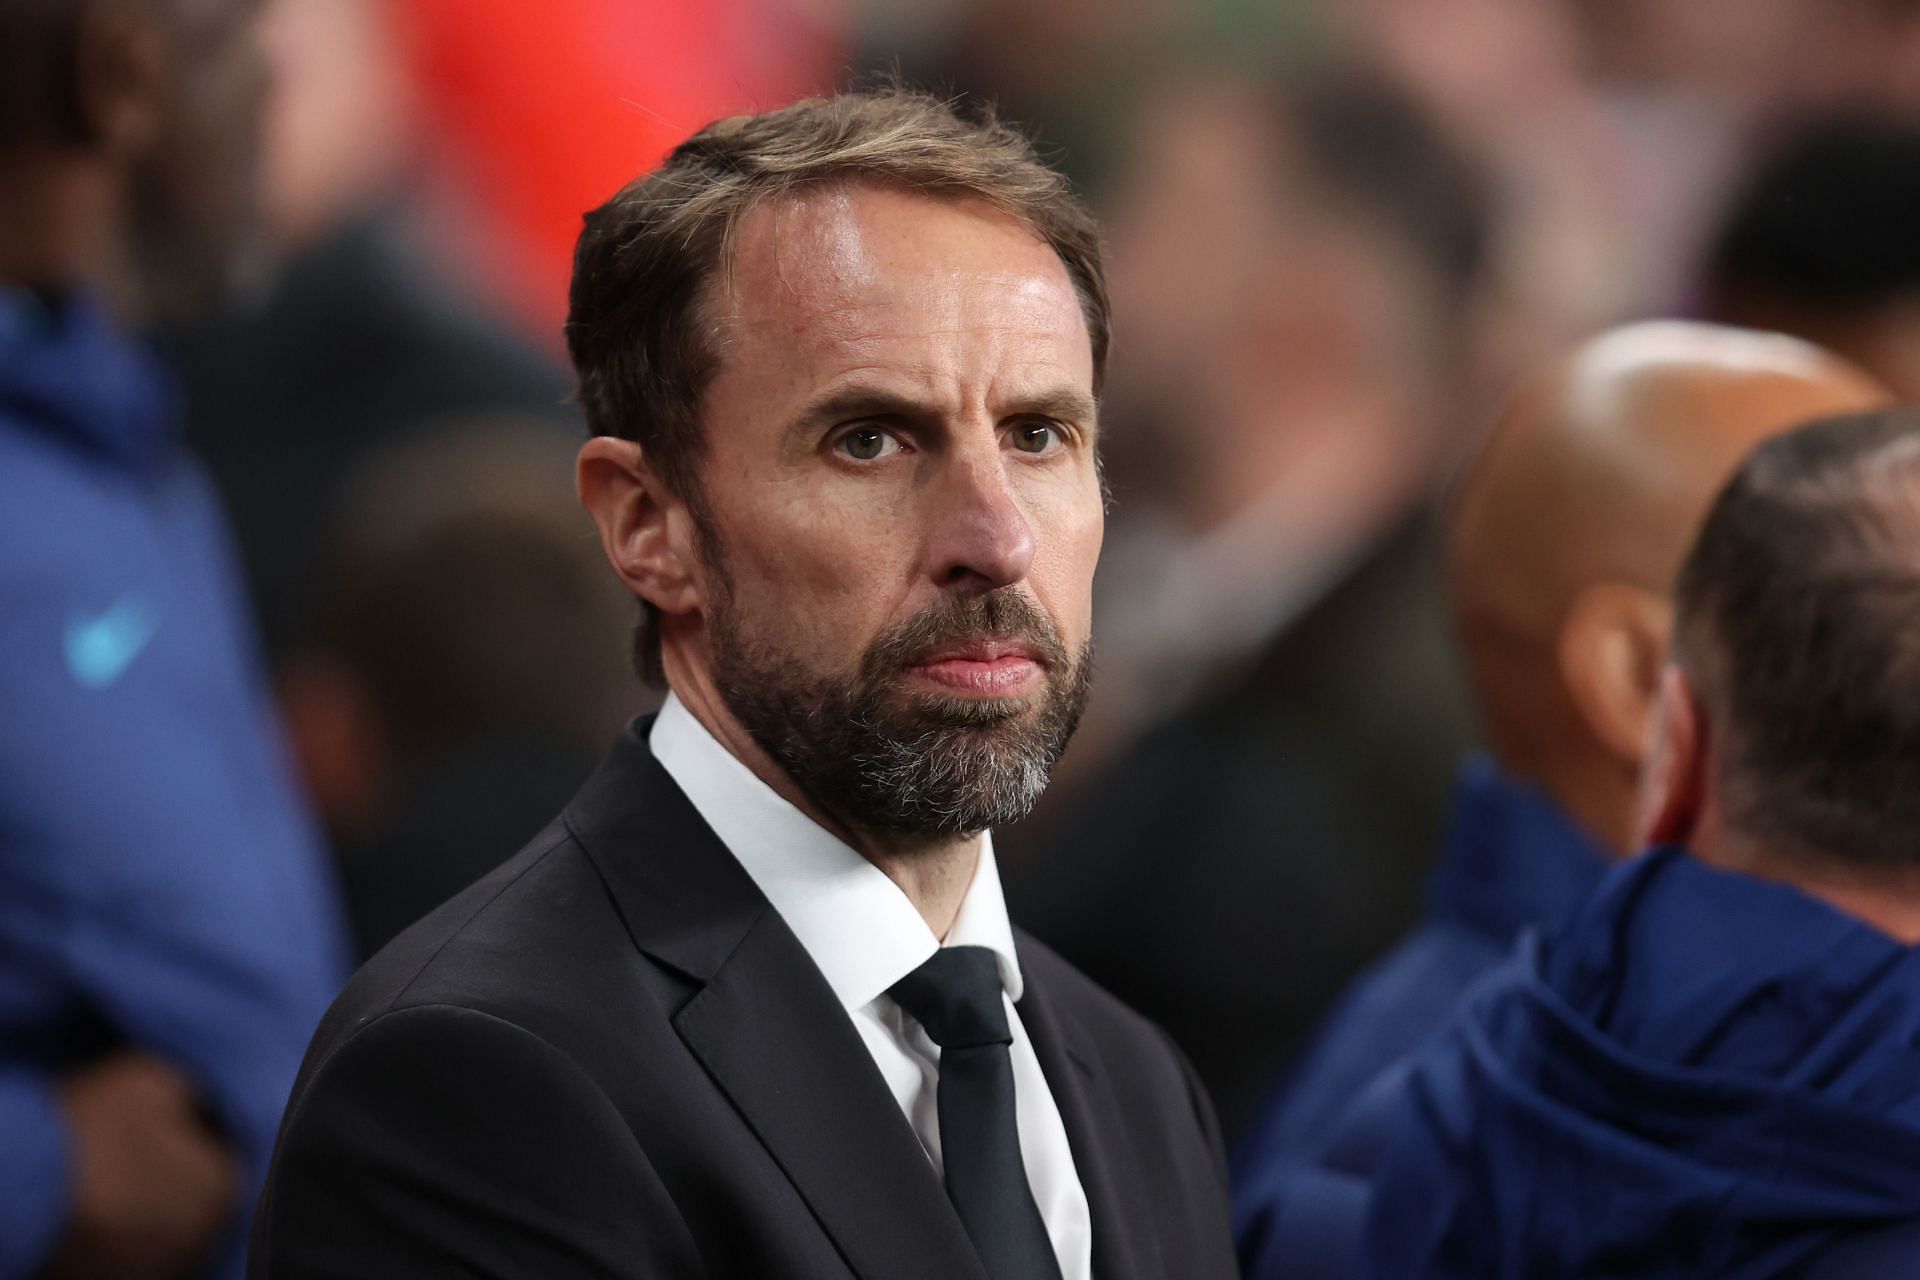 Southgate is under pressure ahead of the 2022 FIFA World Cup